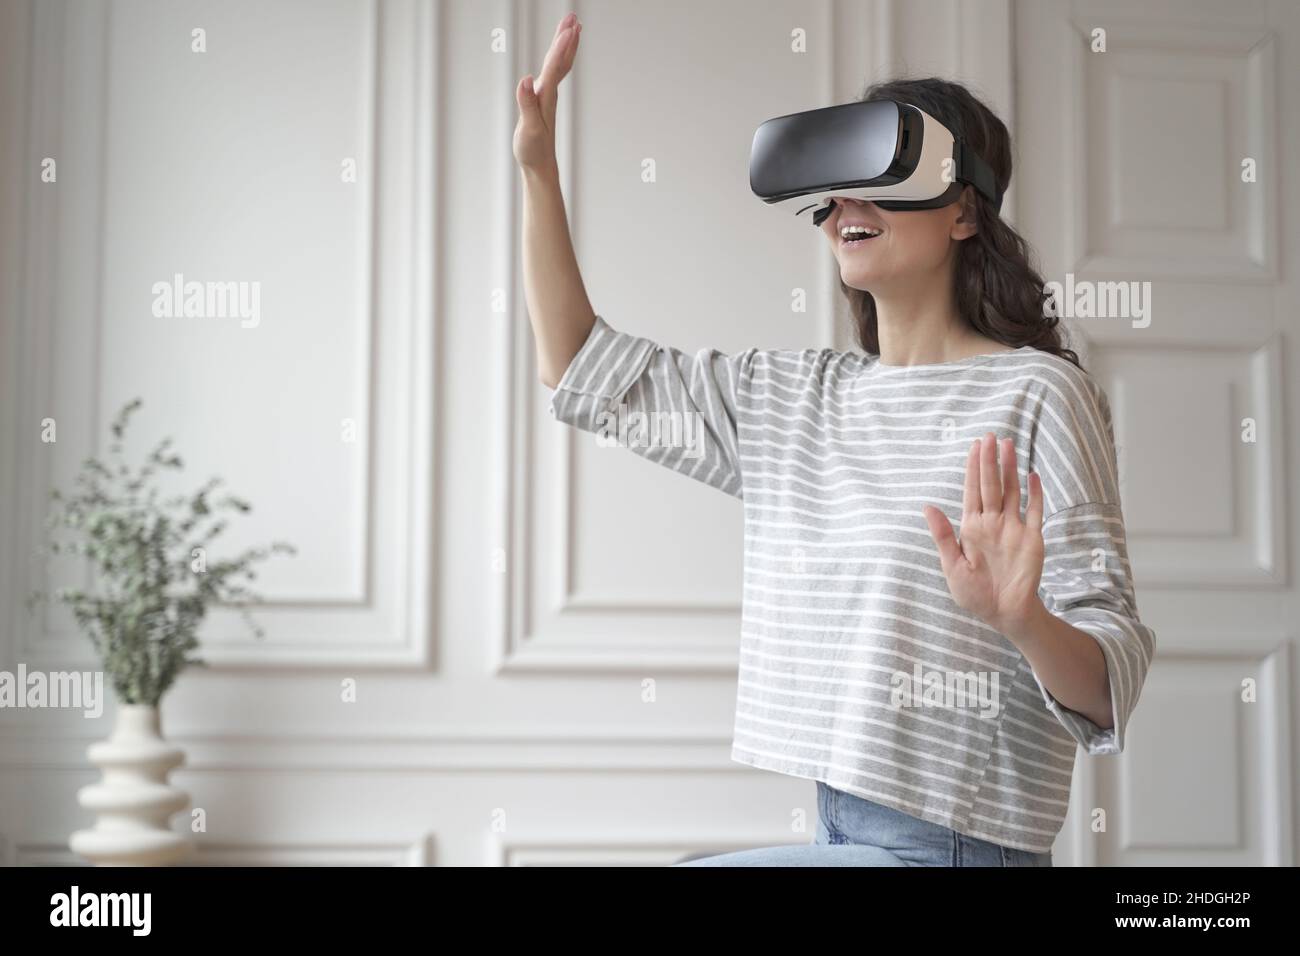 Young happy woman in virtual reality headset enjoying fun shopping experience in augmented world Stock Photo